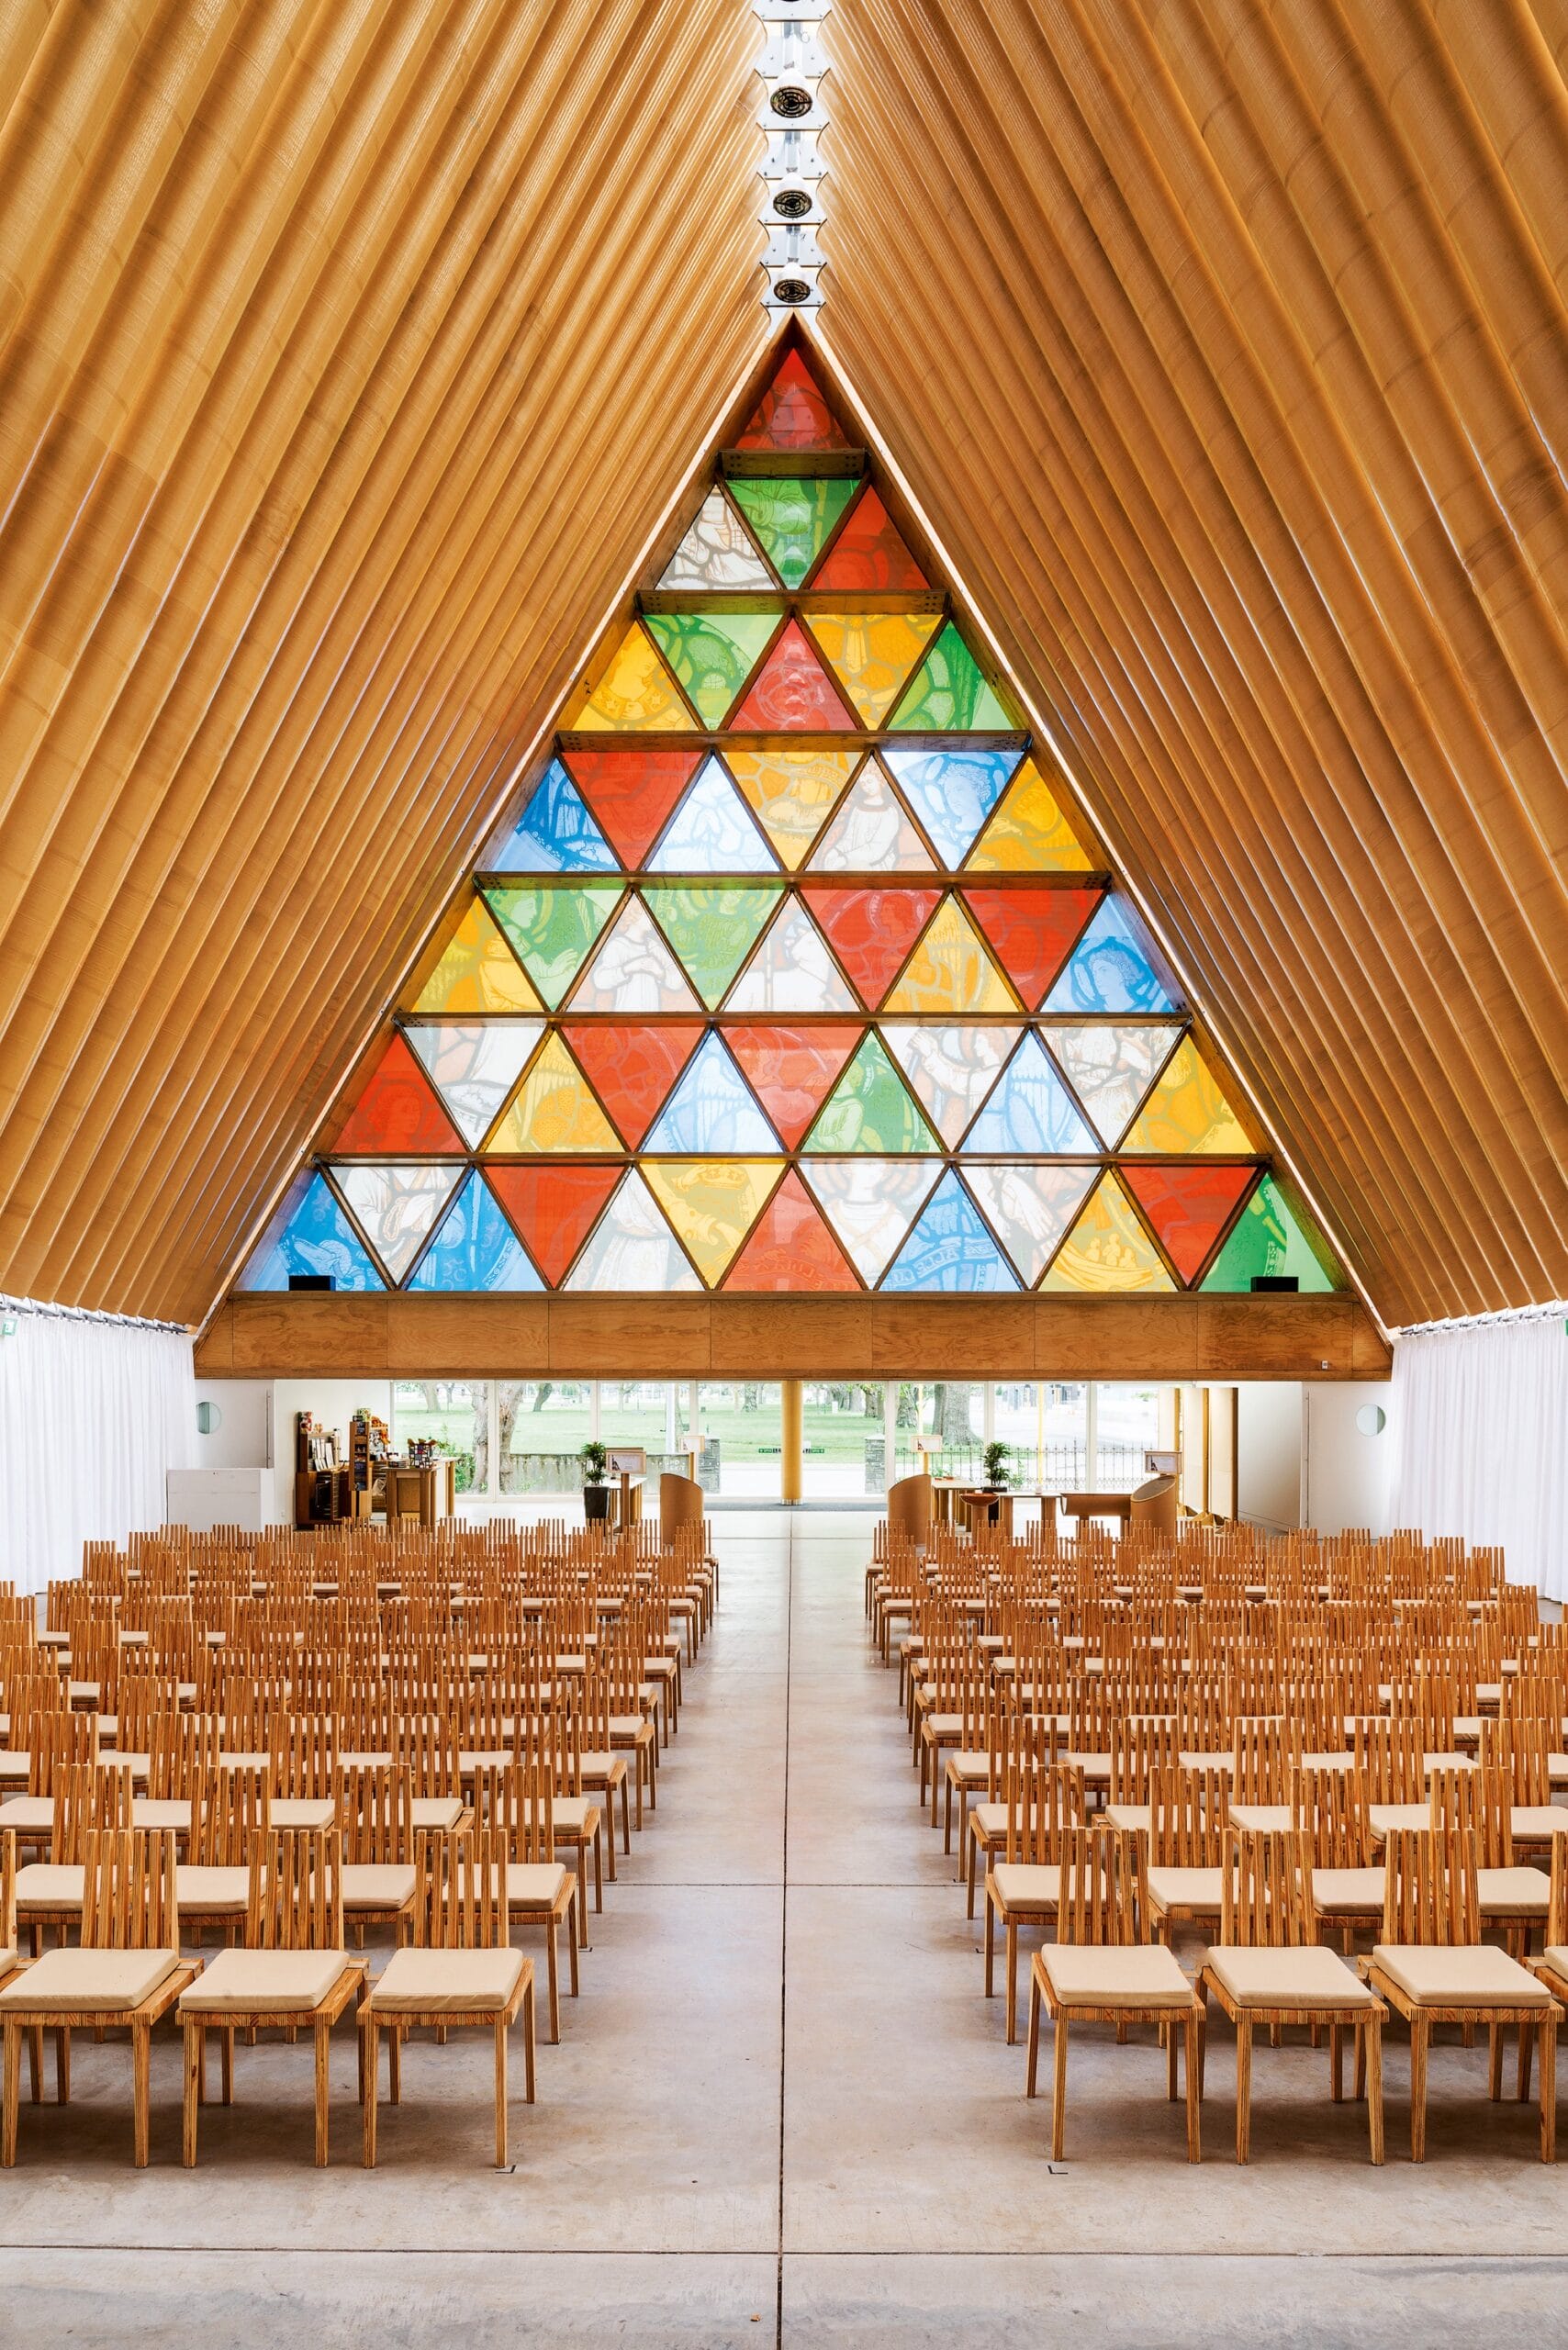 a church in New Zealand with a vaulted ceiling made of cardboard tubes and a large, triangular stained glass window made of numerous other small triangles of color